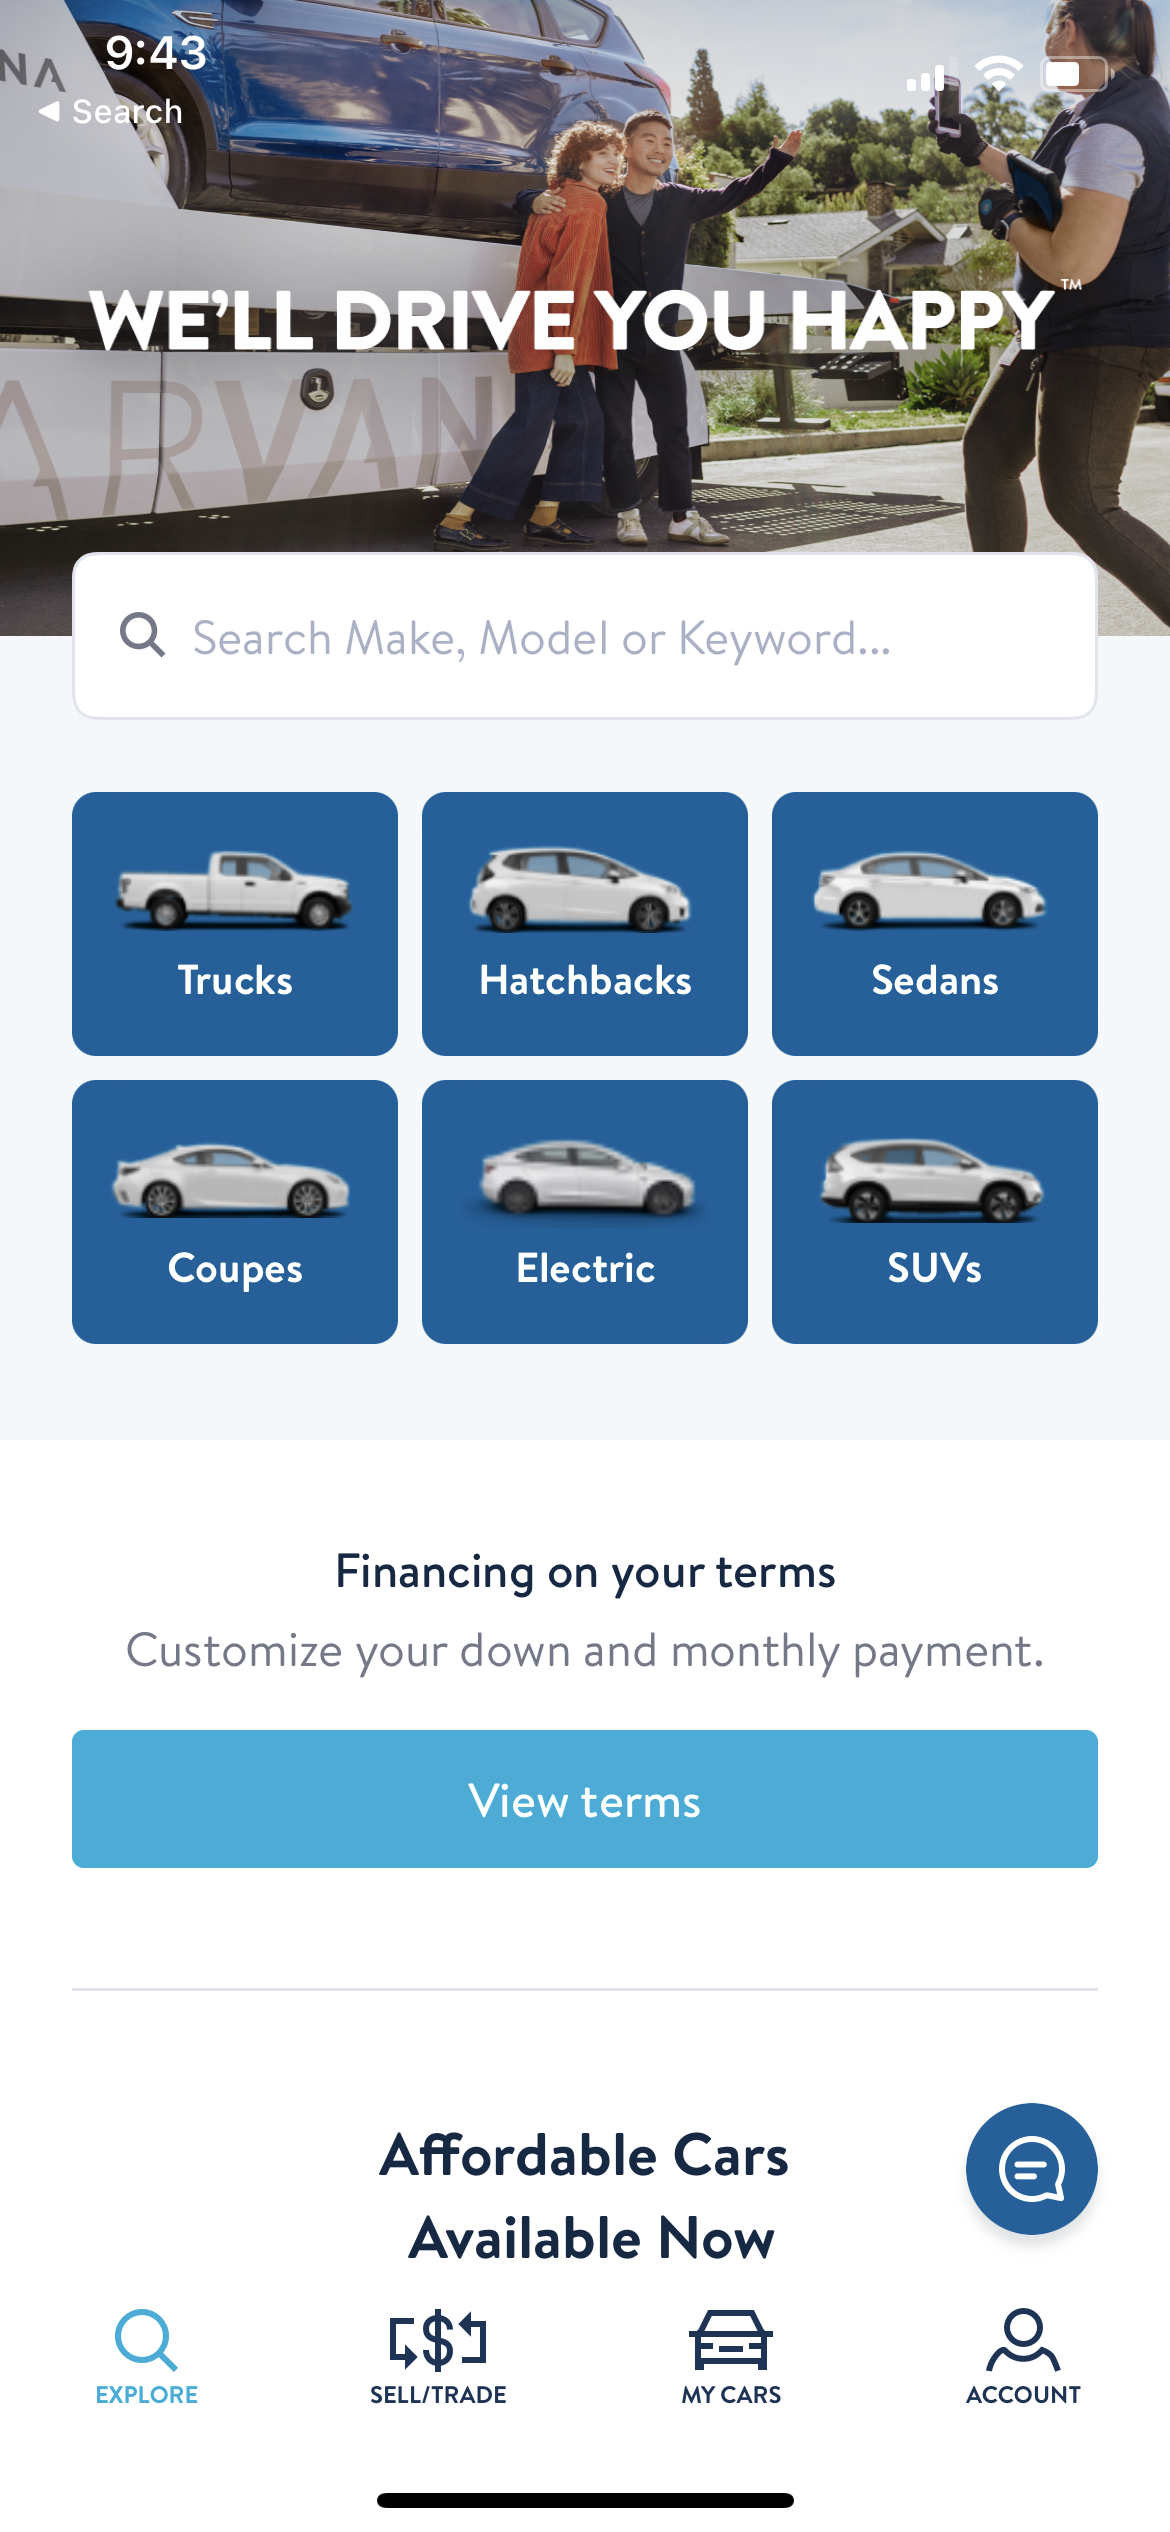 Some CX suggestions for Carvana